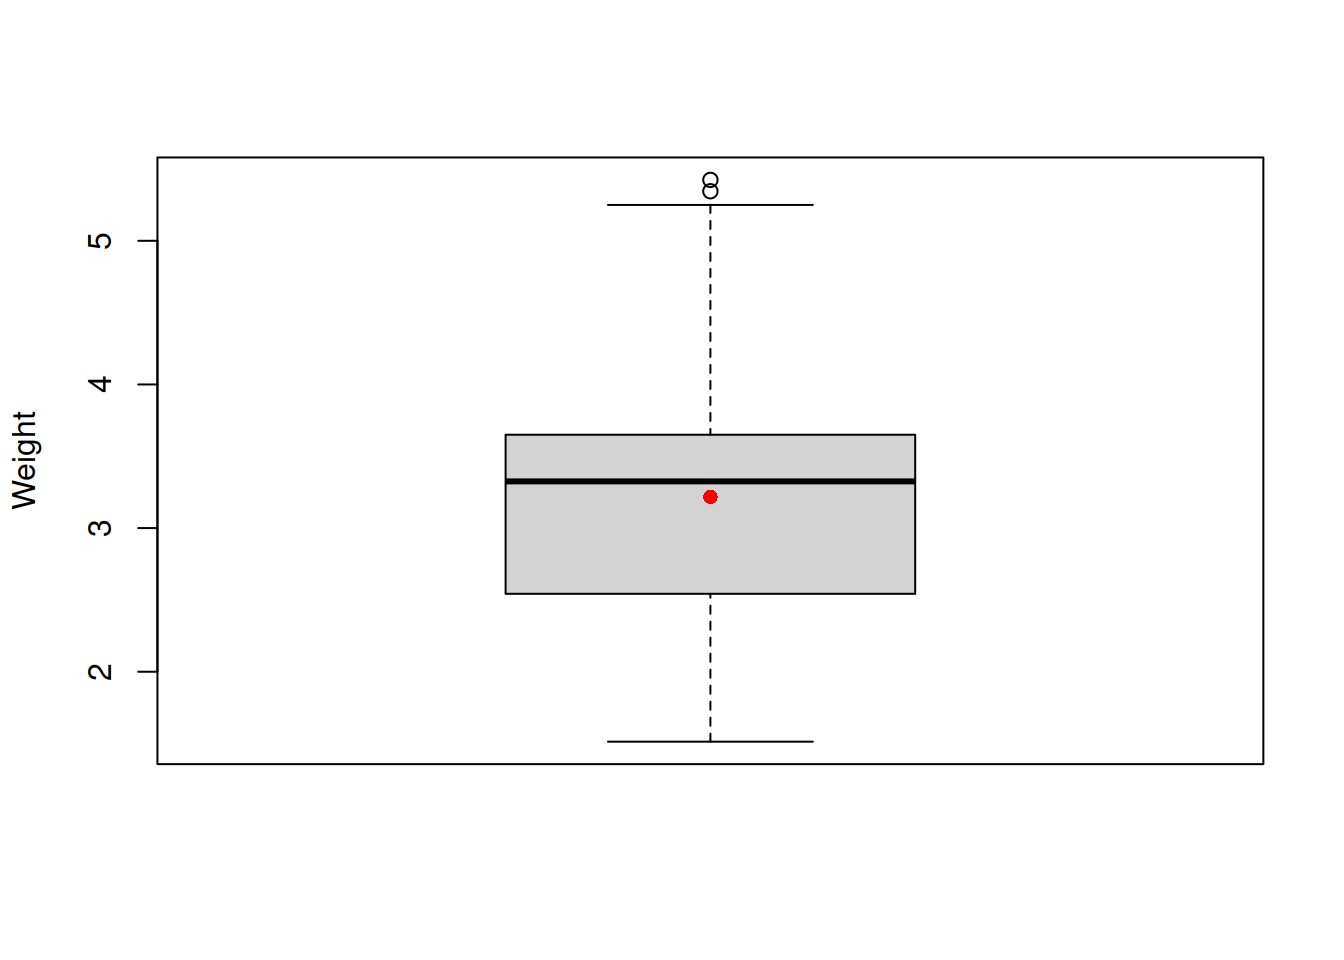 Boxplot of the variable weight.